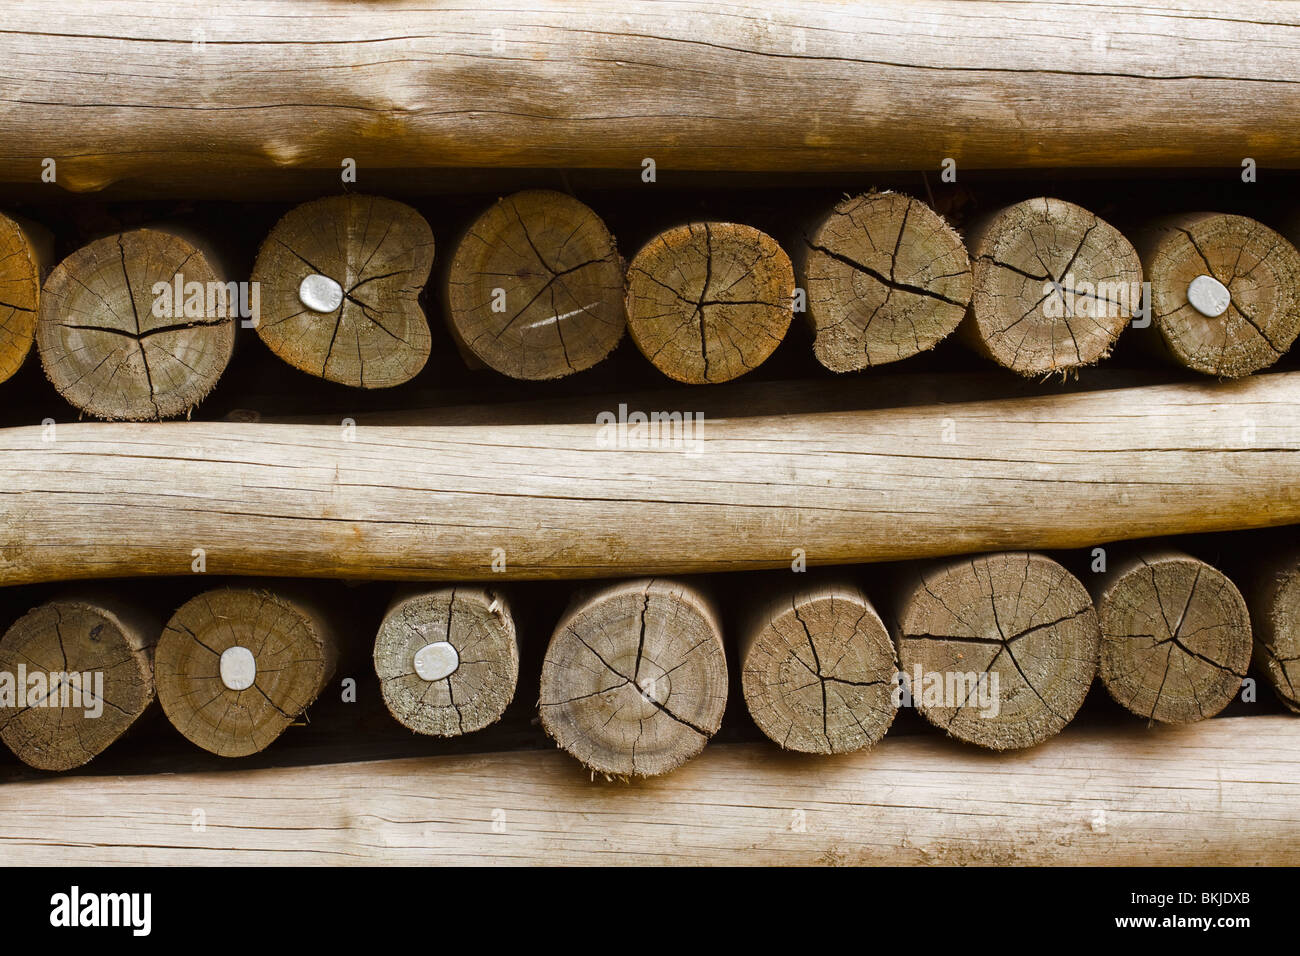 Stacked cut timber poles used for fencing, carrying markings confirming standardised timber treatment. South Africa. Stock Photo